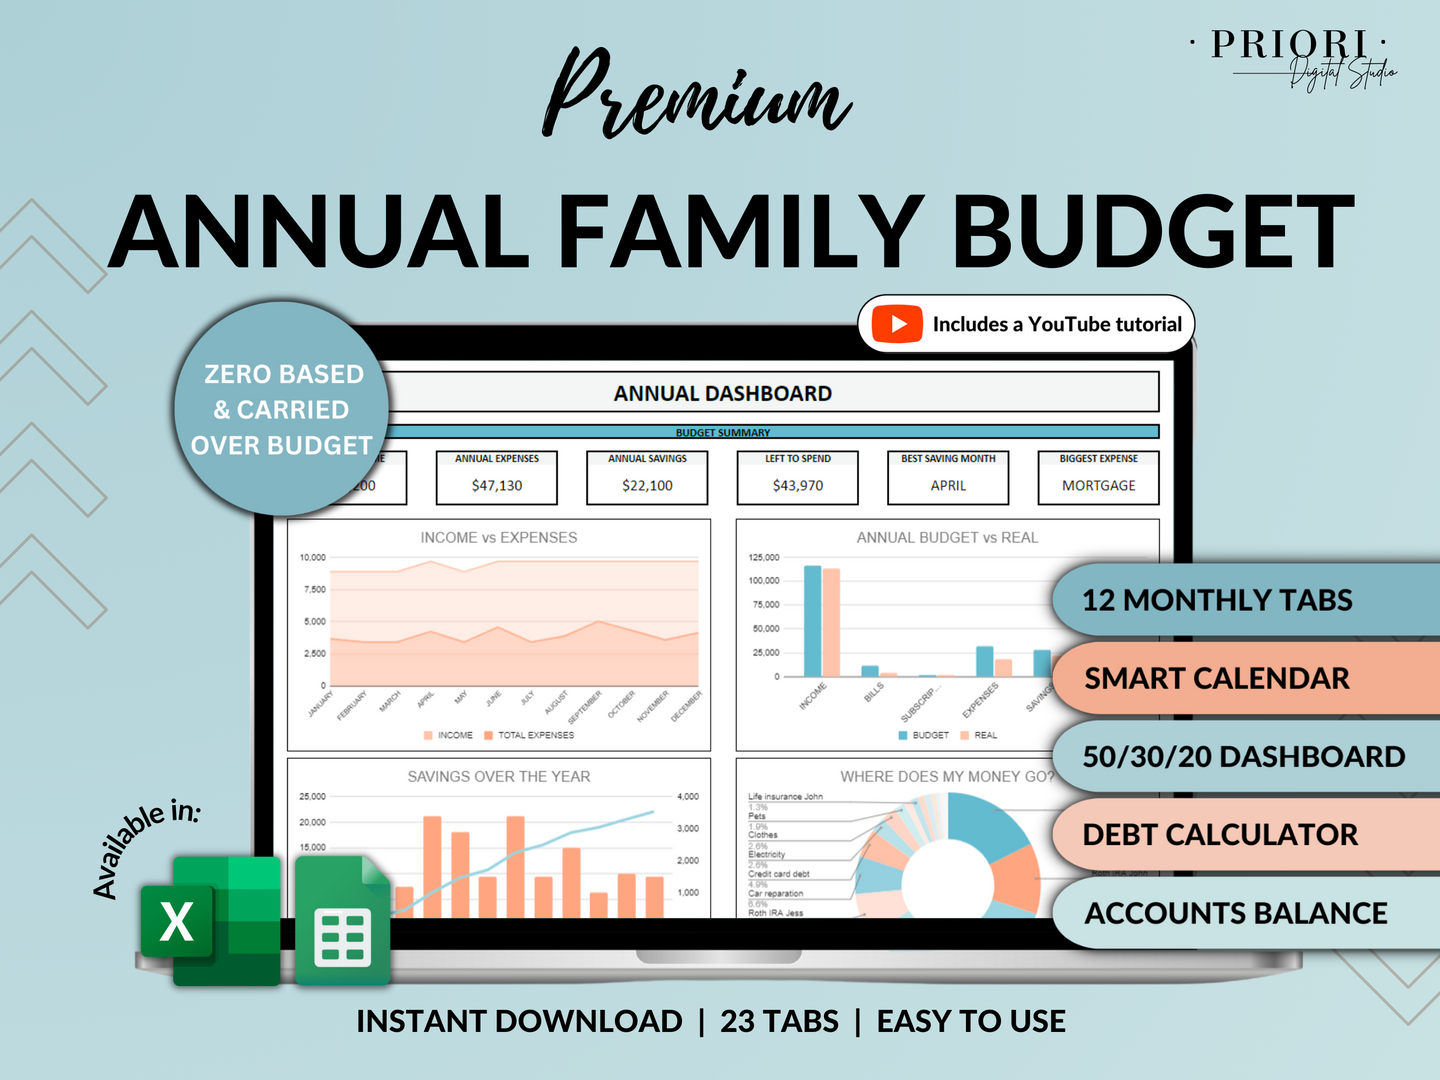 Family Annual Budget Spreadsheet Monthly Budget Biweekly Tracker Excel Google Sheets Couple Financial Planner Bill Calendar Debt Tracker Blue